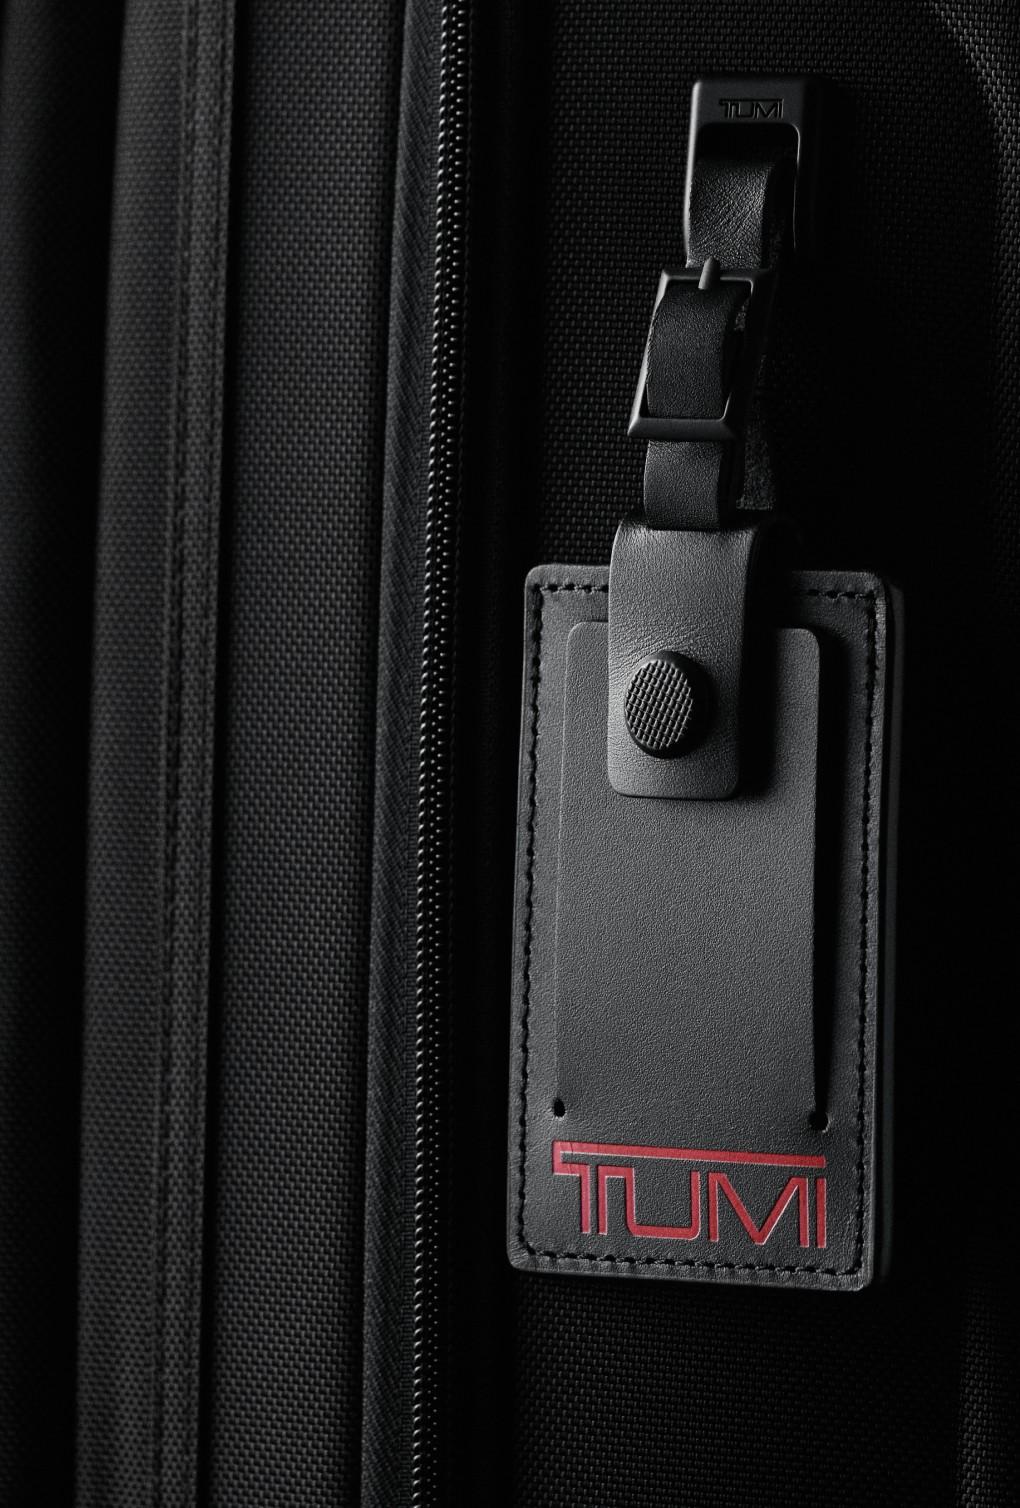 Tumi TUMI ALPHA BUSINESS CARRY ON CASE 26126DH £600 